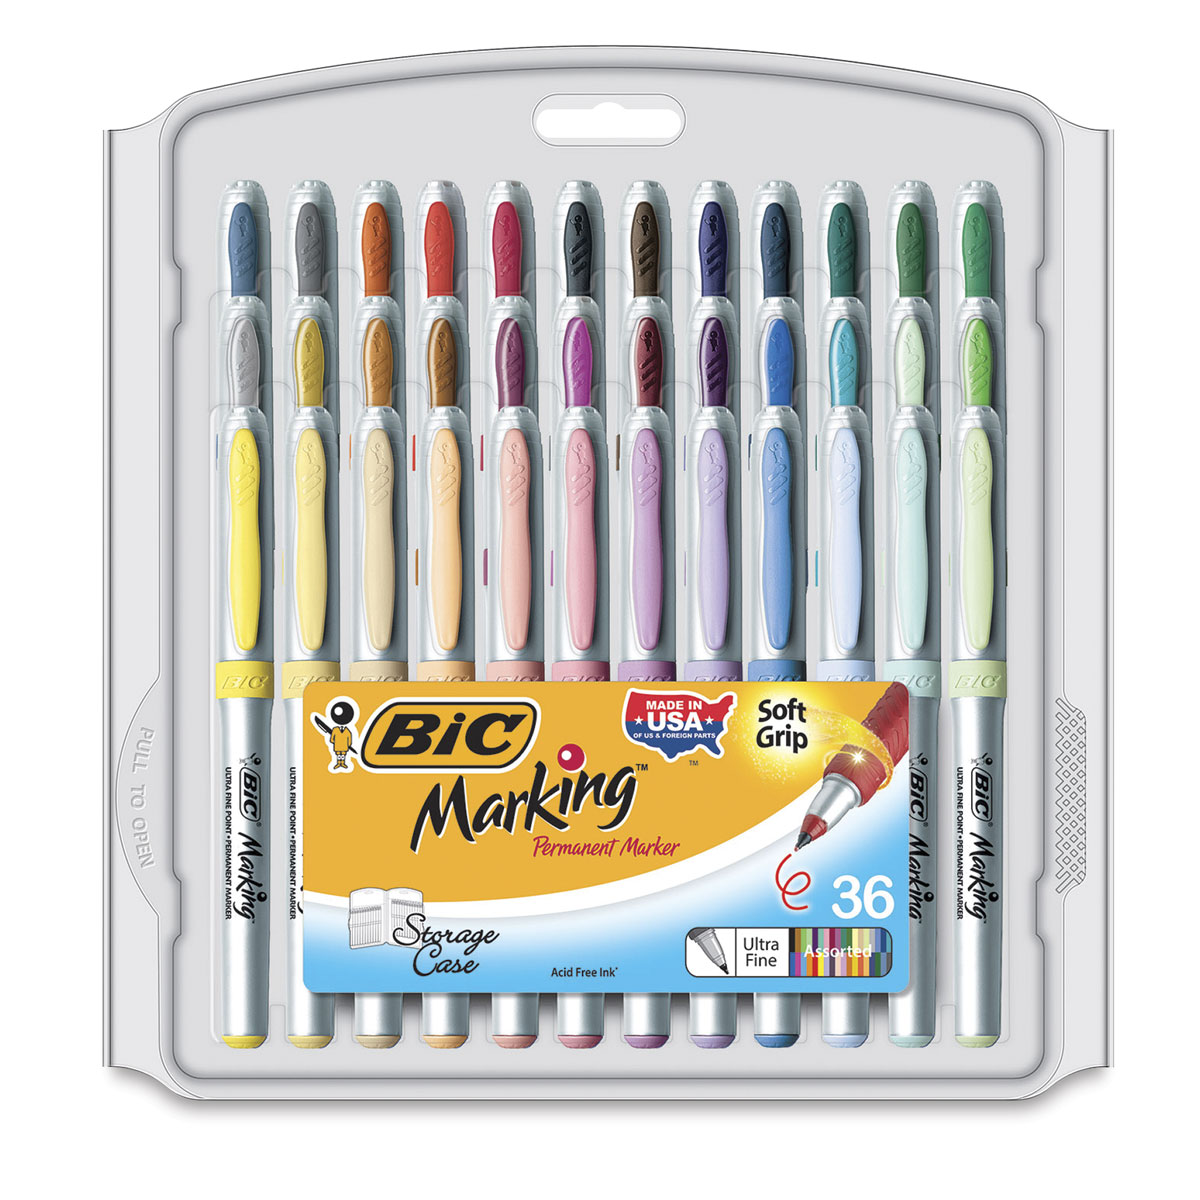 BIC Mark-It Permanent Markers, Fine Point, 8 Count Assorted Colors